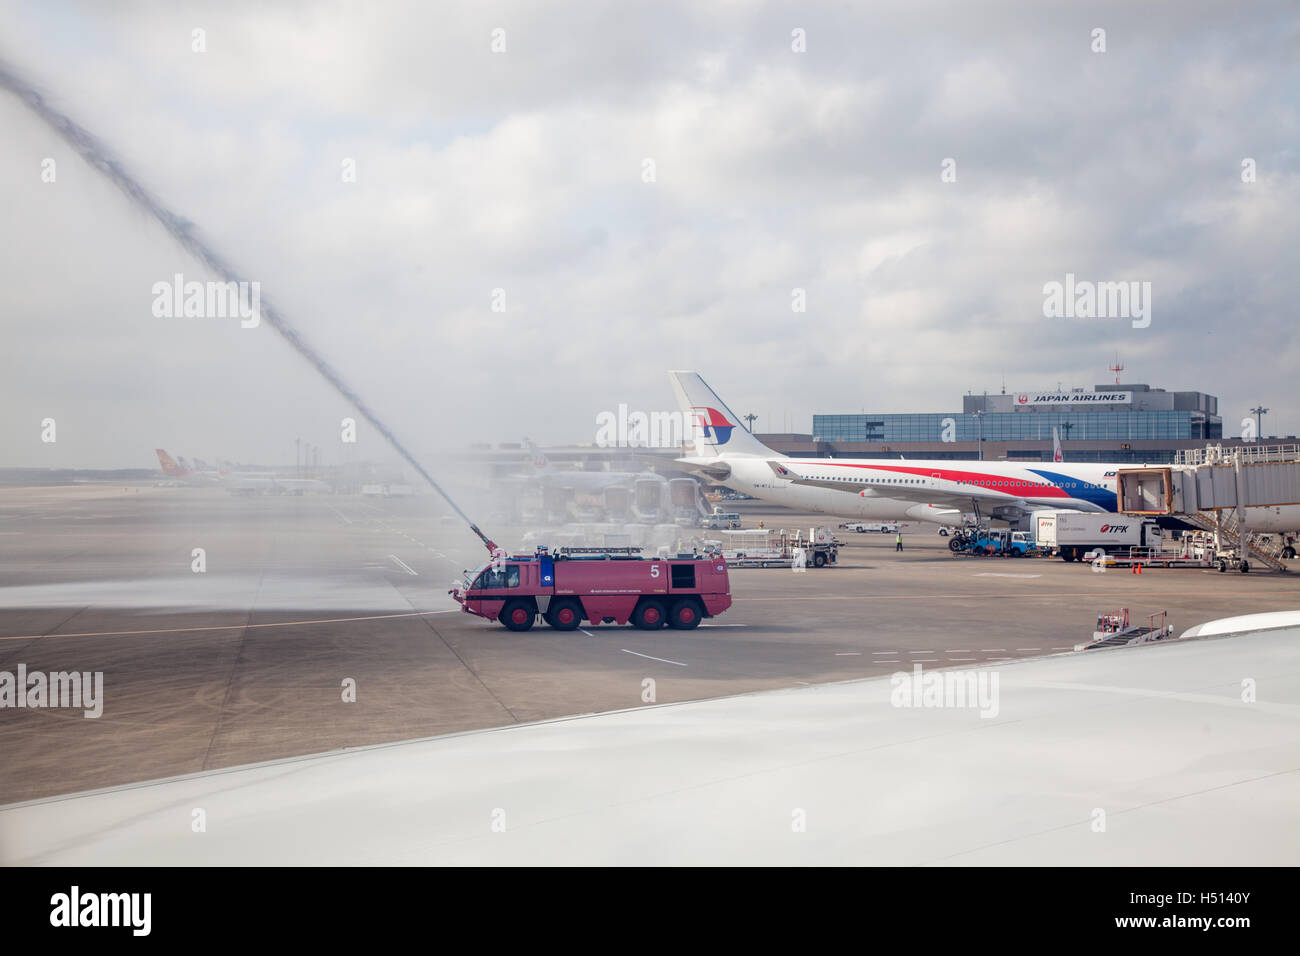 Water cannon salute welcoming just landed Iberia airlines aircraft flying inaugural flight IB6801 from Madrid, Spain arriving to Narita International airport, Tokyo, Japan on 19 October 2016  Credit:  ImageNature, Alexander Belokurov / Alamy Stock Photo